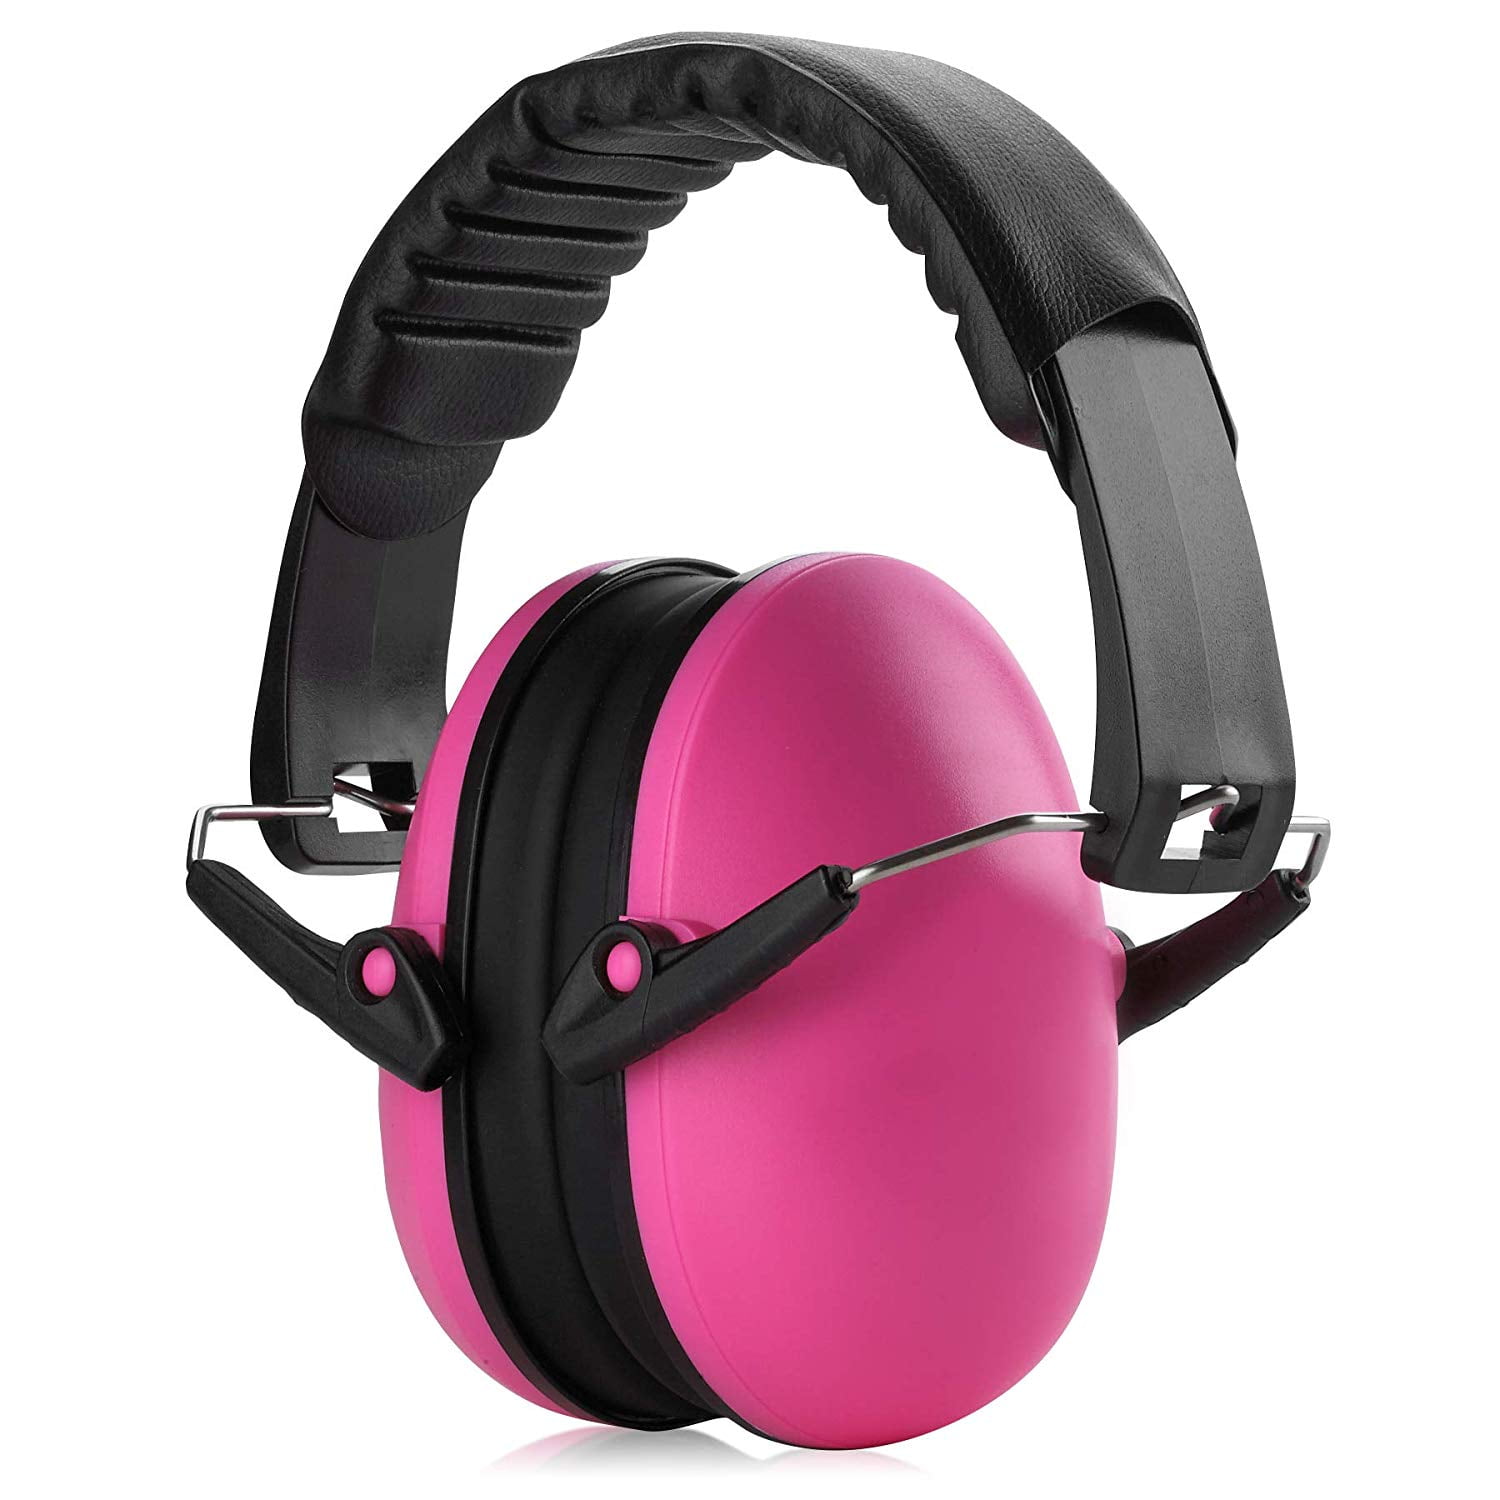 Hearing Protection Electronic Headphones Ear Muffs Noise Shooter Shooting Safety 